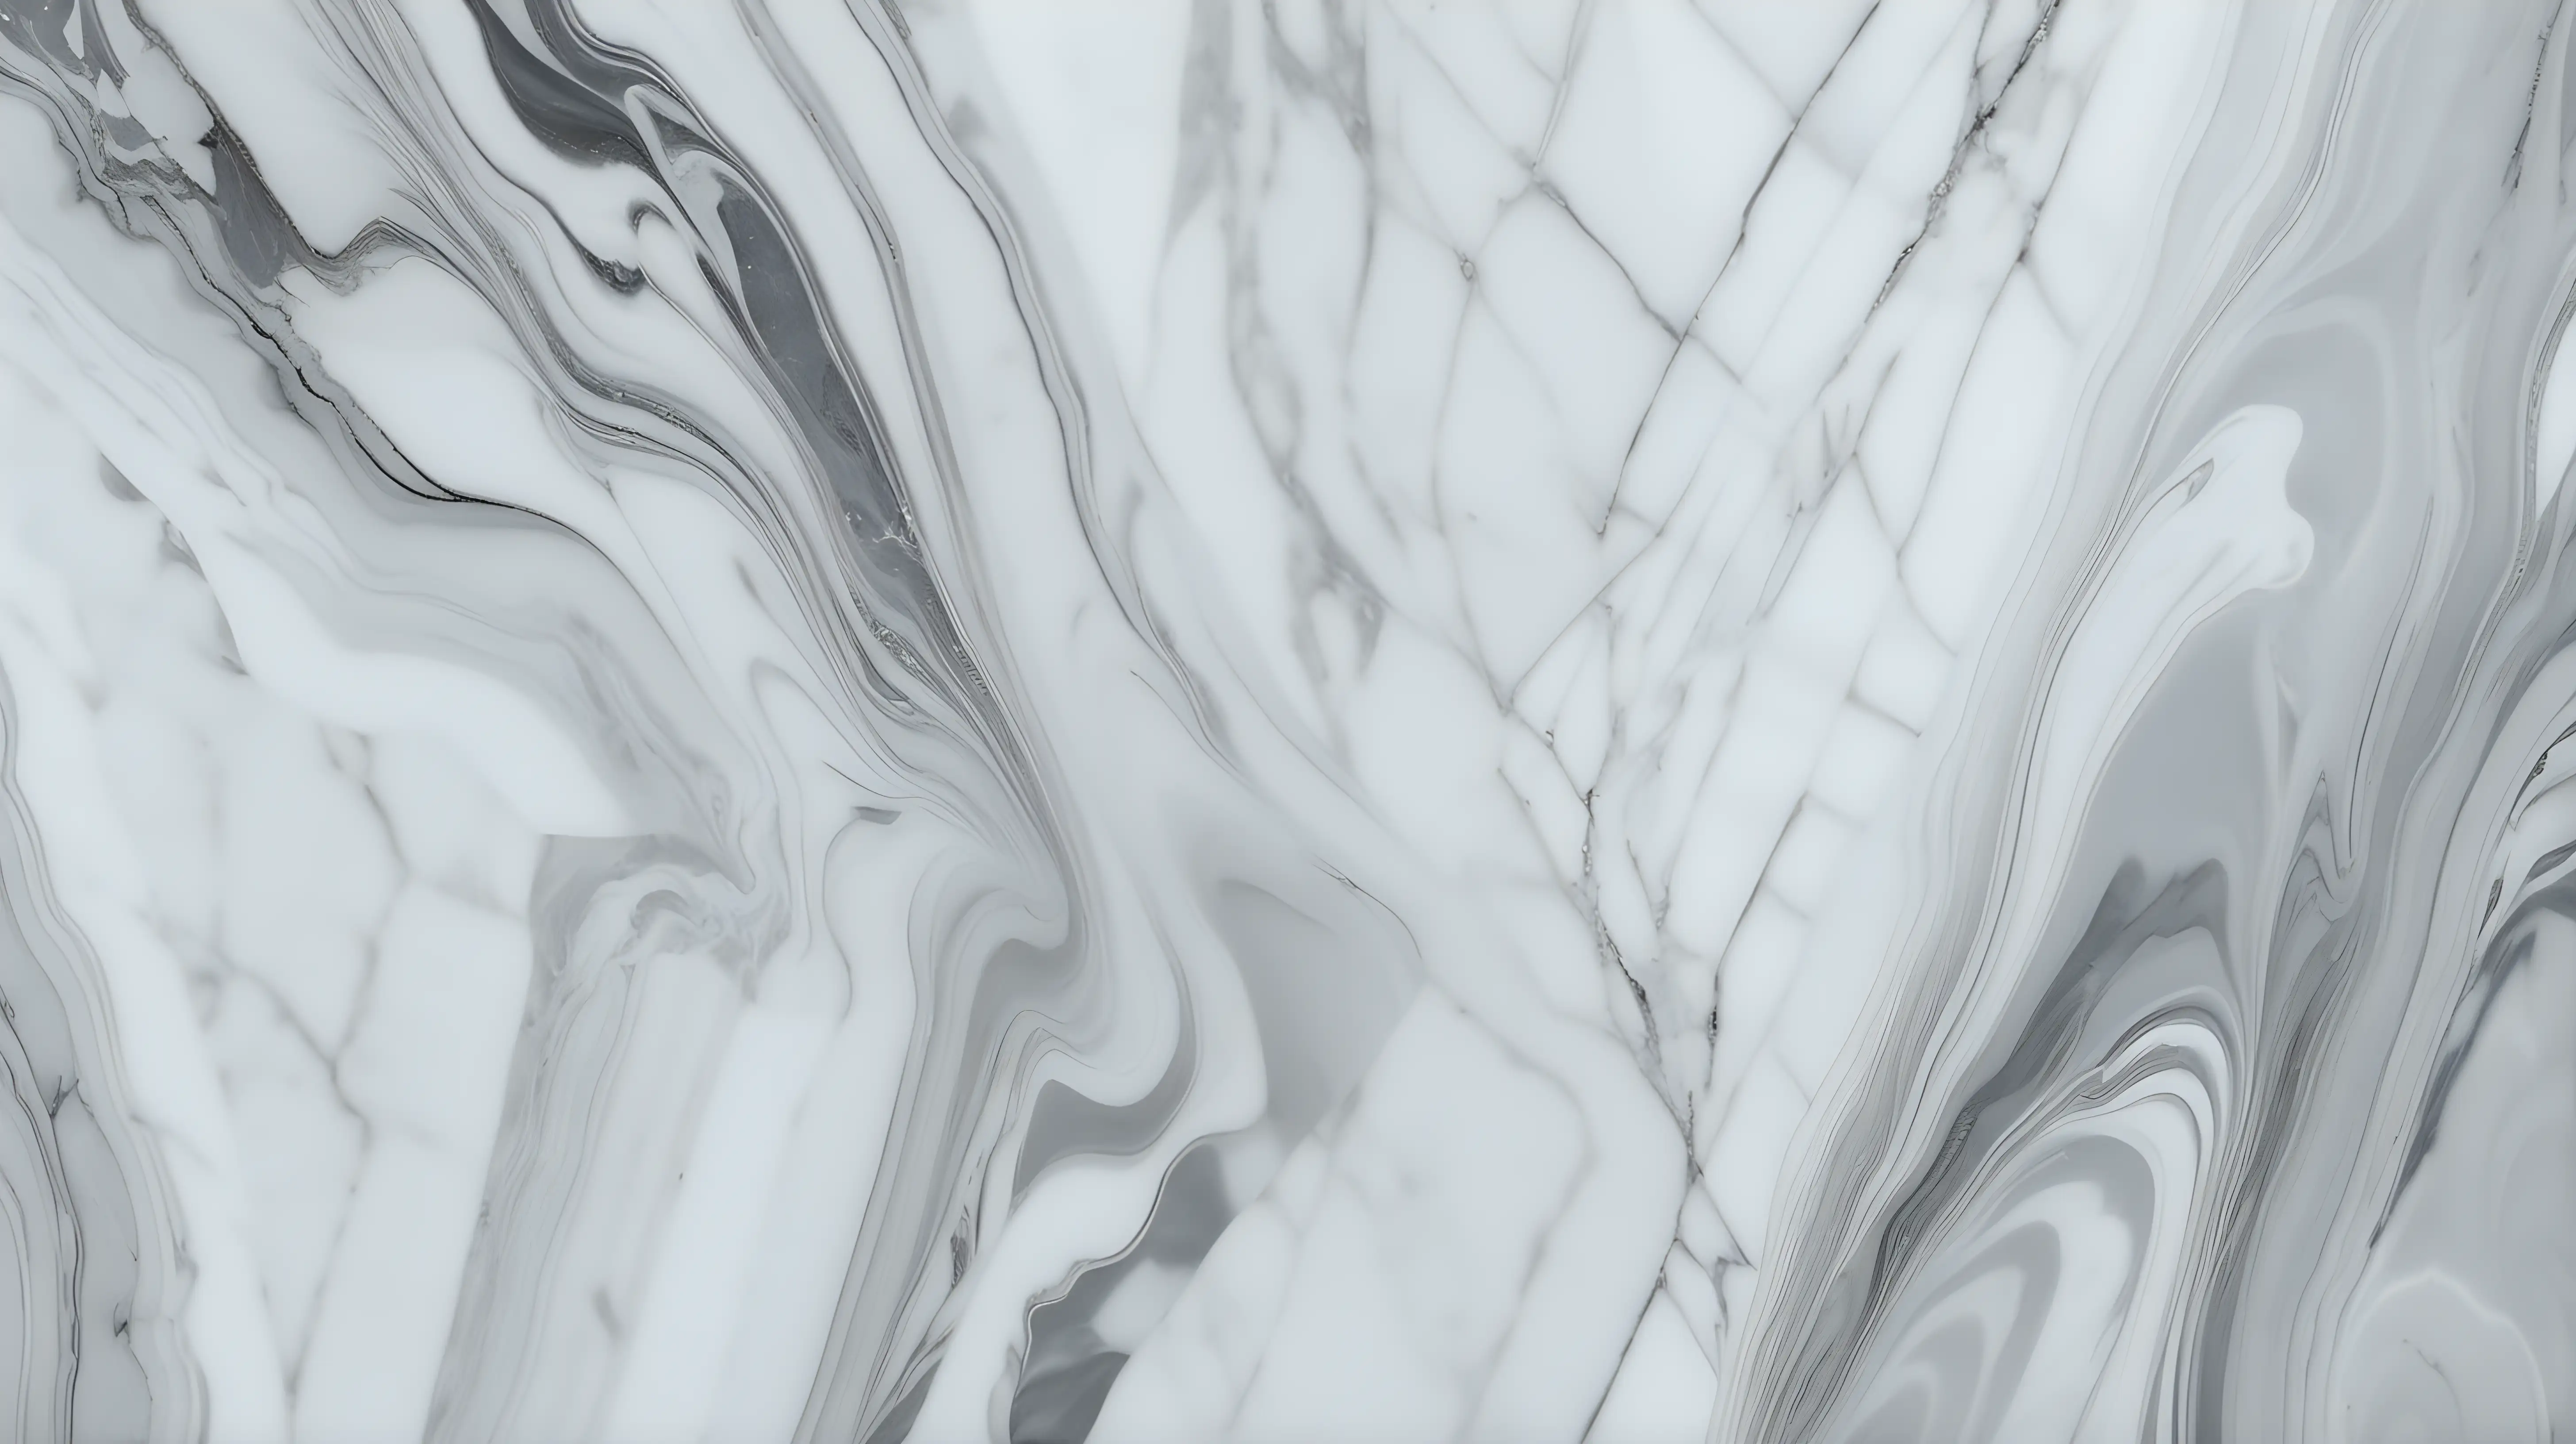 A minimalist marble texture in shades of gray and white, adding elegance and sophistication to any design.